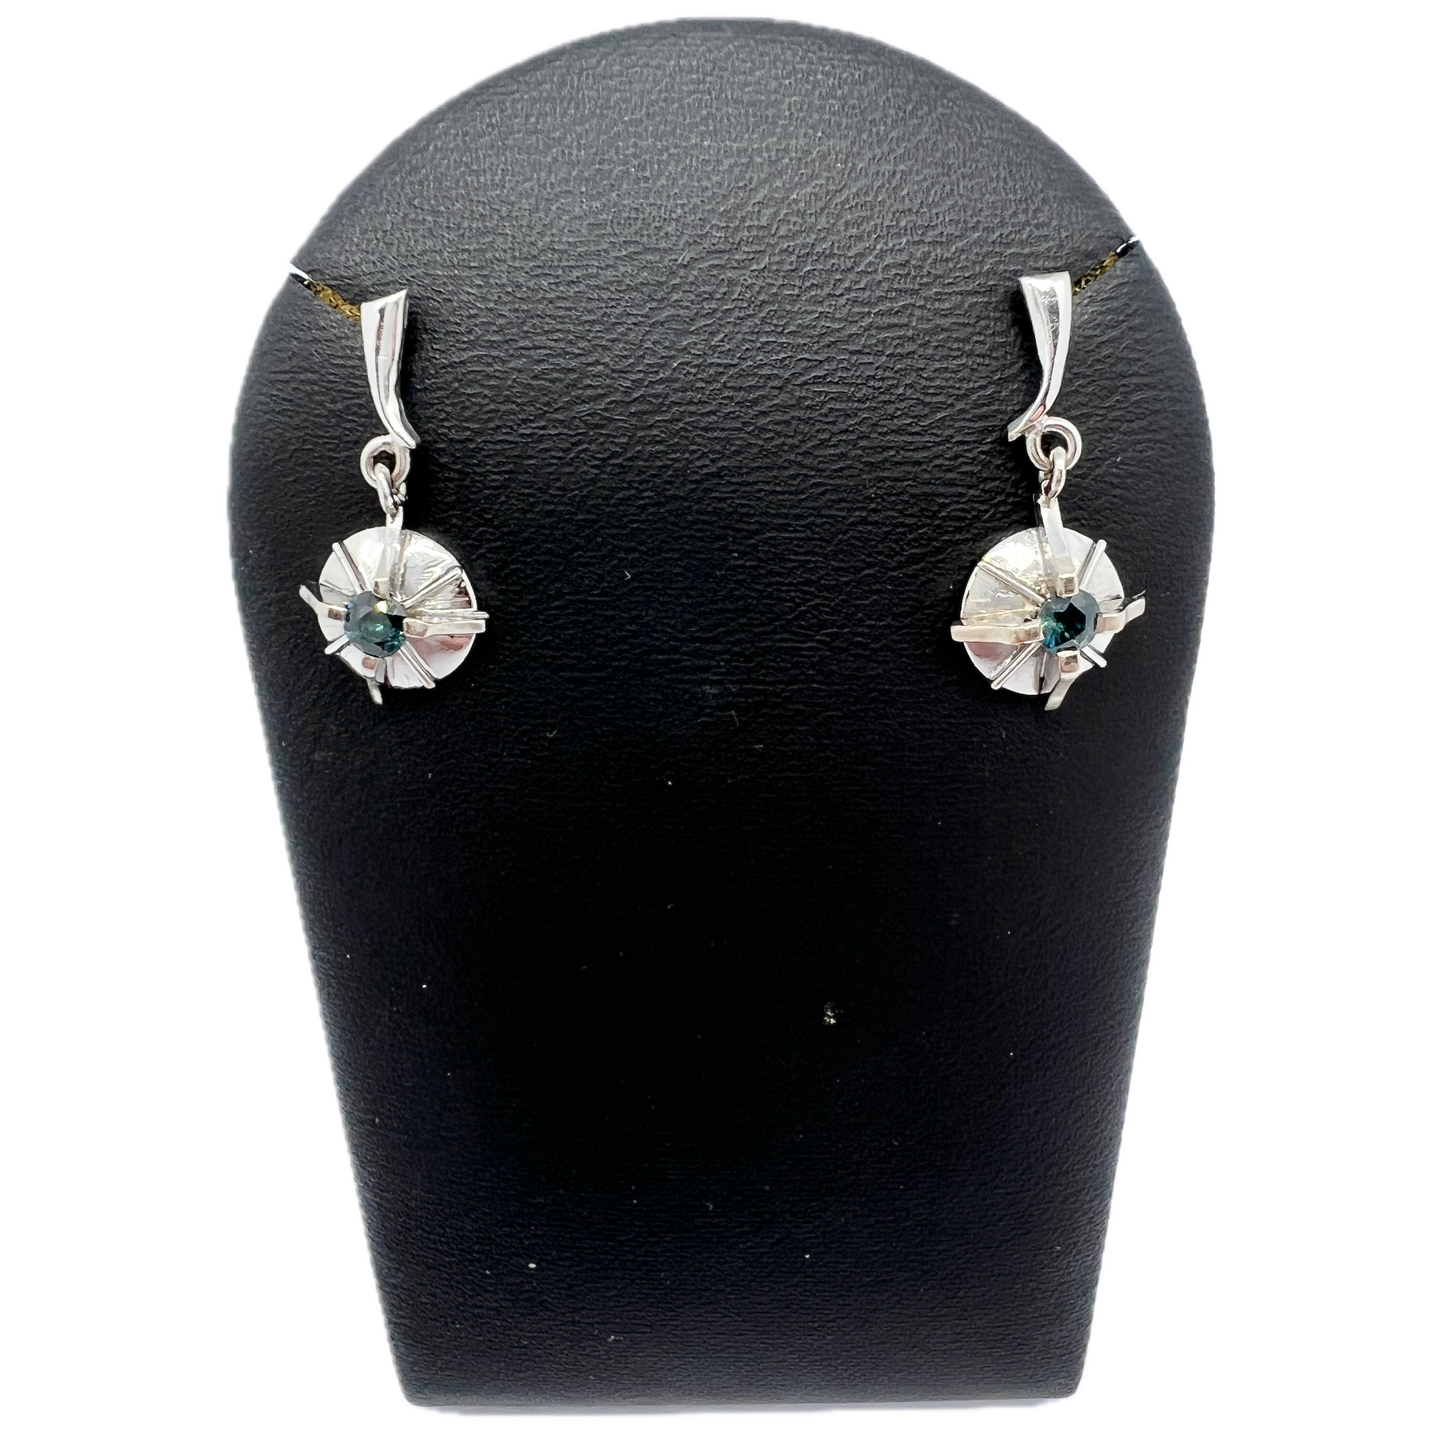 Vintage 1960s Space Age 18k Gold White Gold Sapphire Earrings.